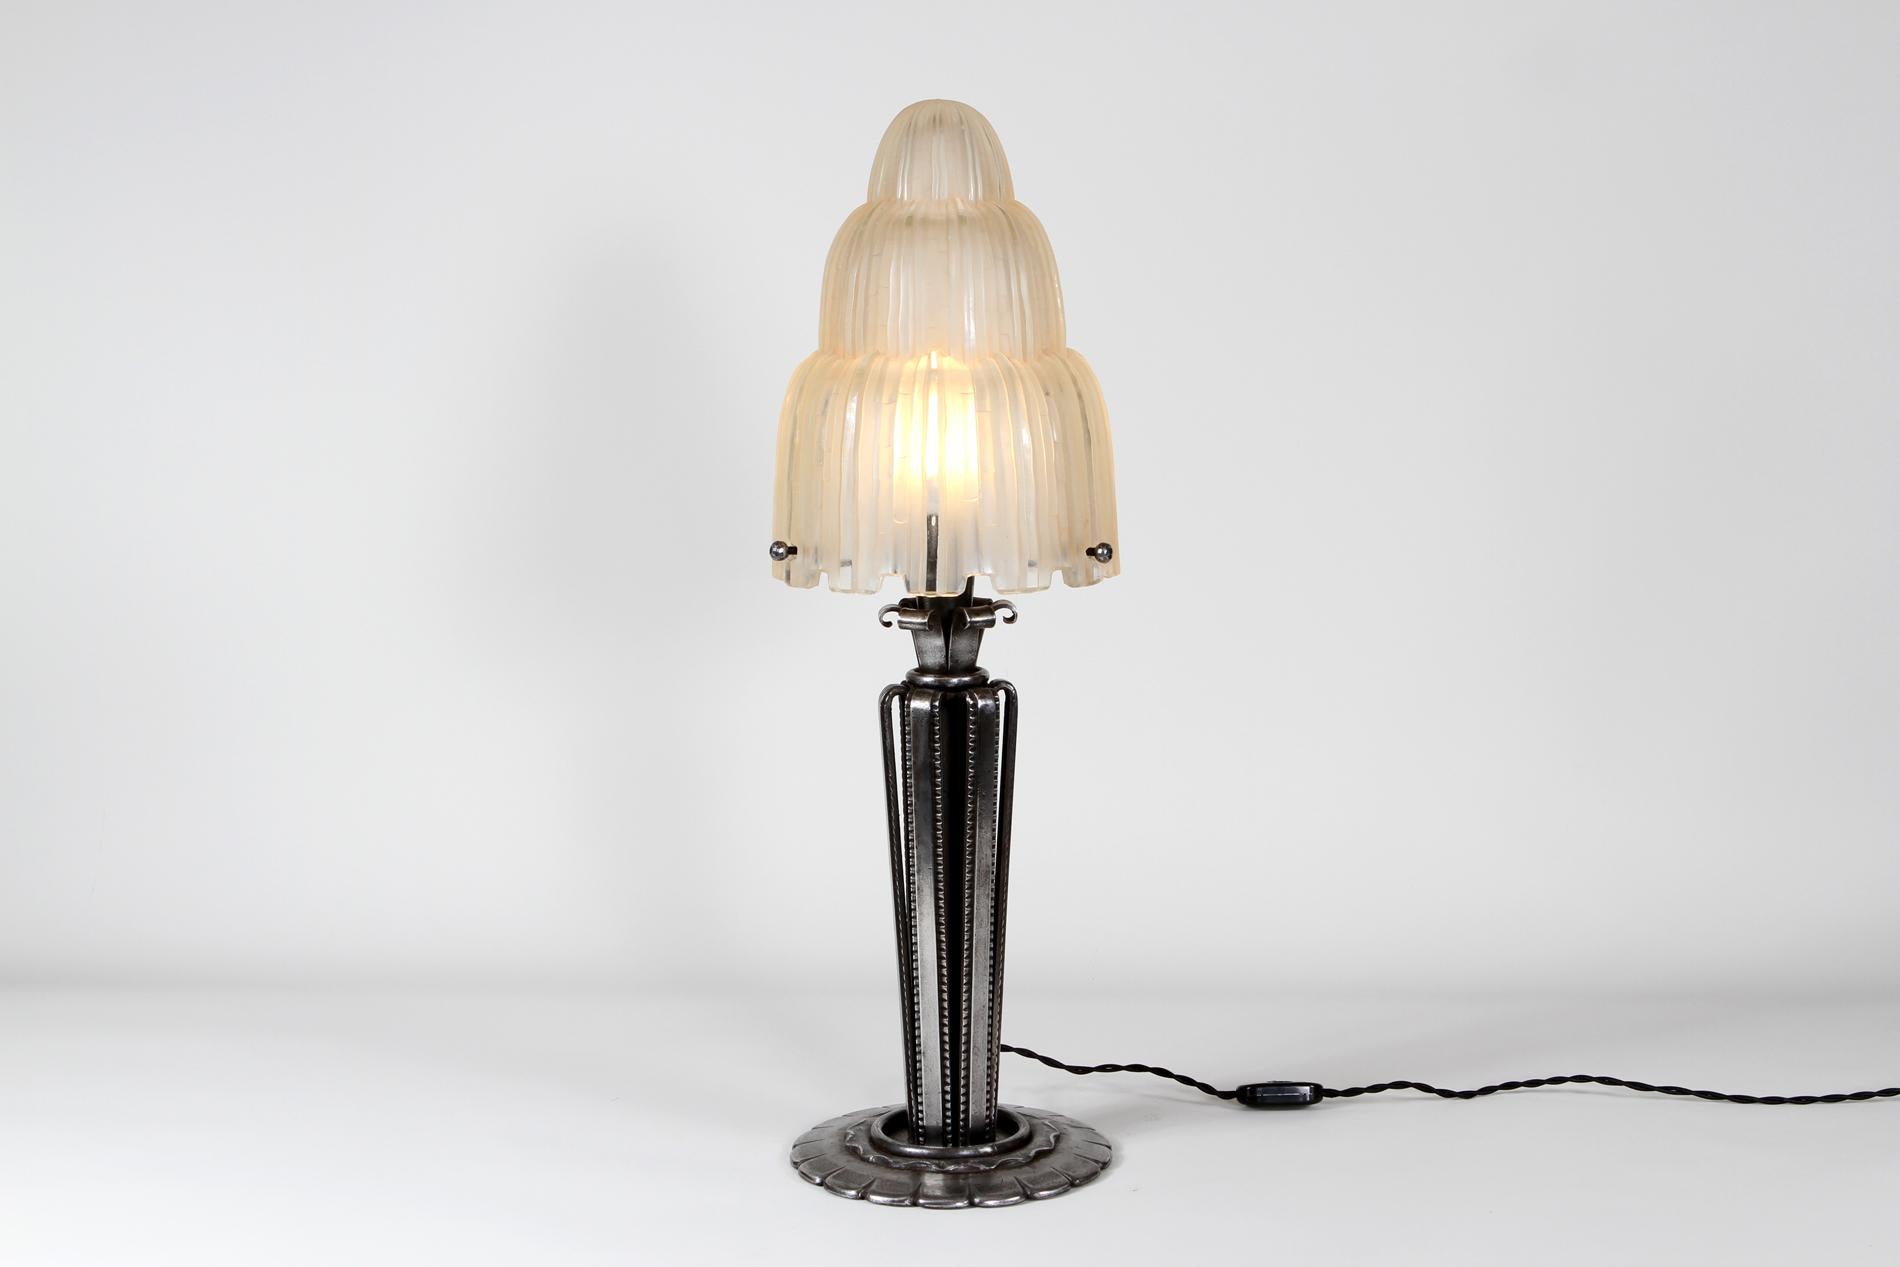 French Art Deco table lamp from 1930 in wrought iron and glass. The base is from Paul Kiss and the glass is the famous 